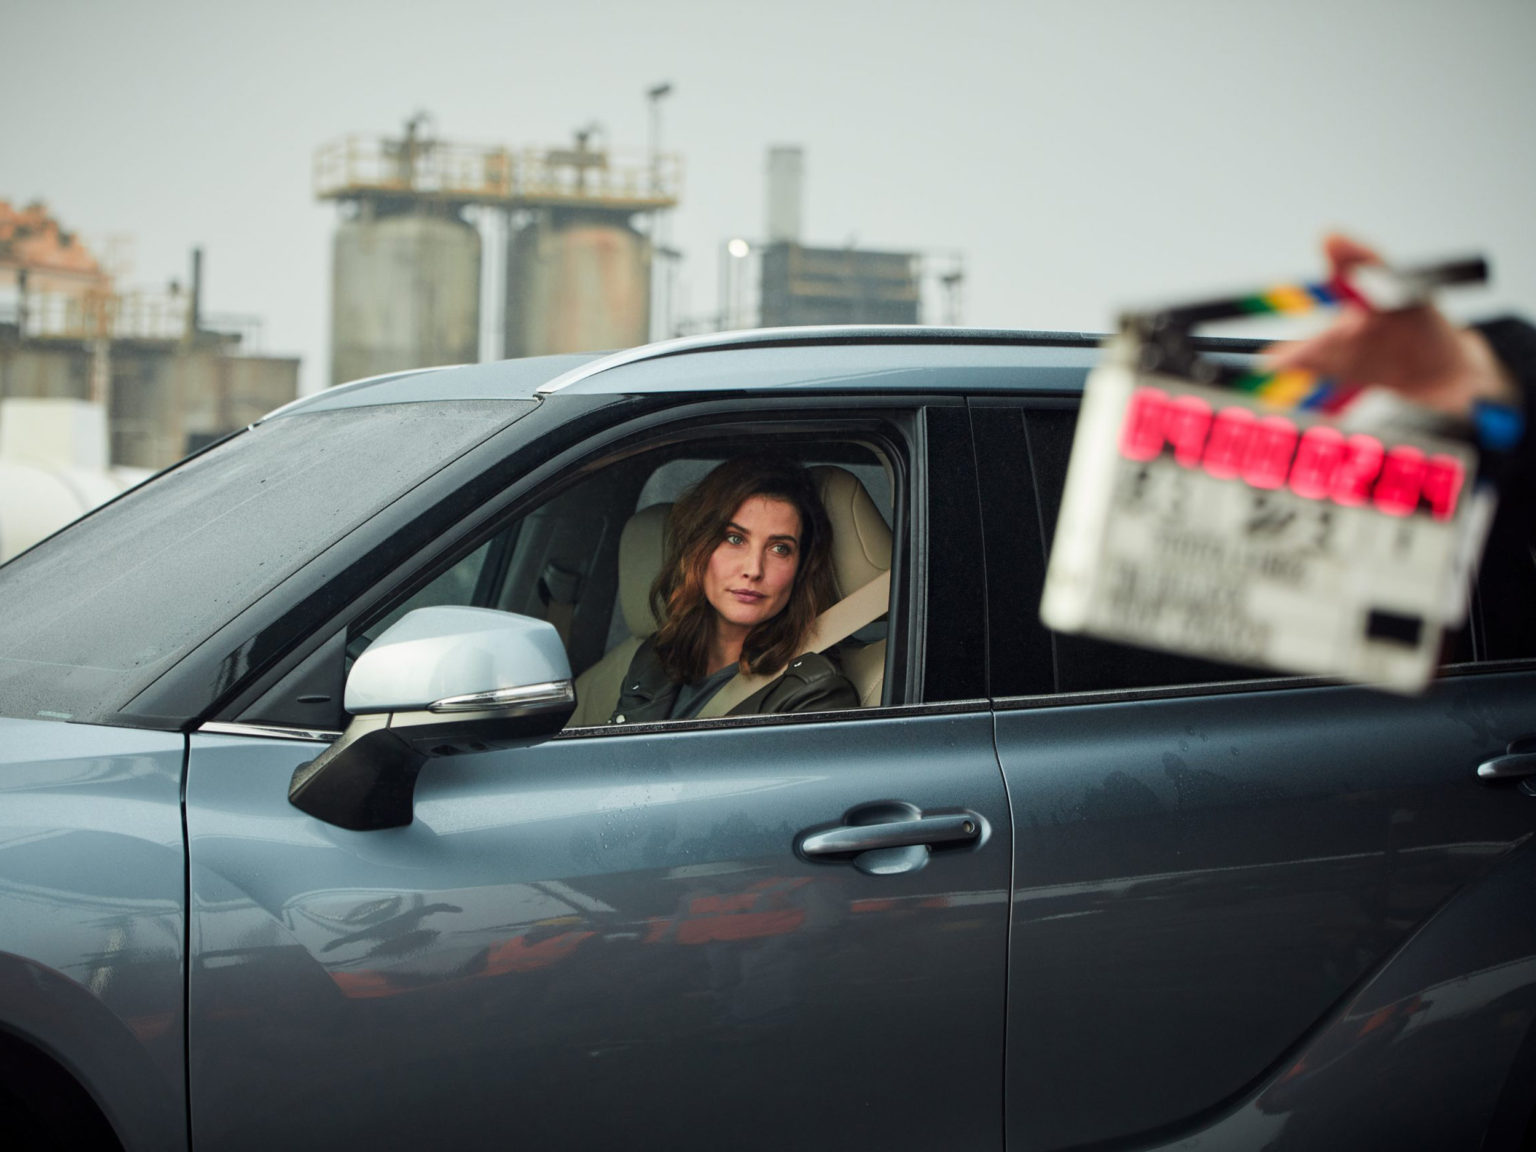 Actress Cobie Smulders starts in the new Toyota commercial.